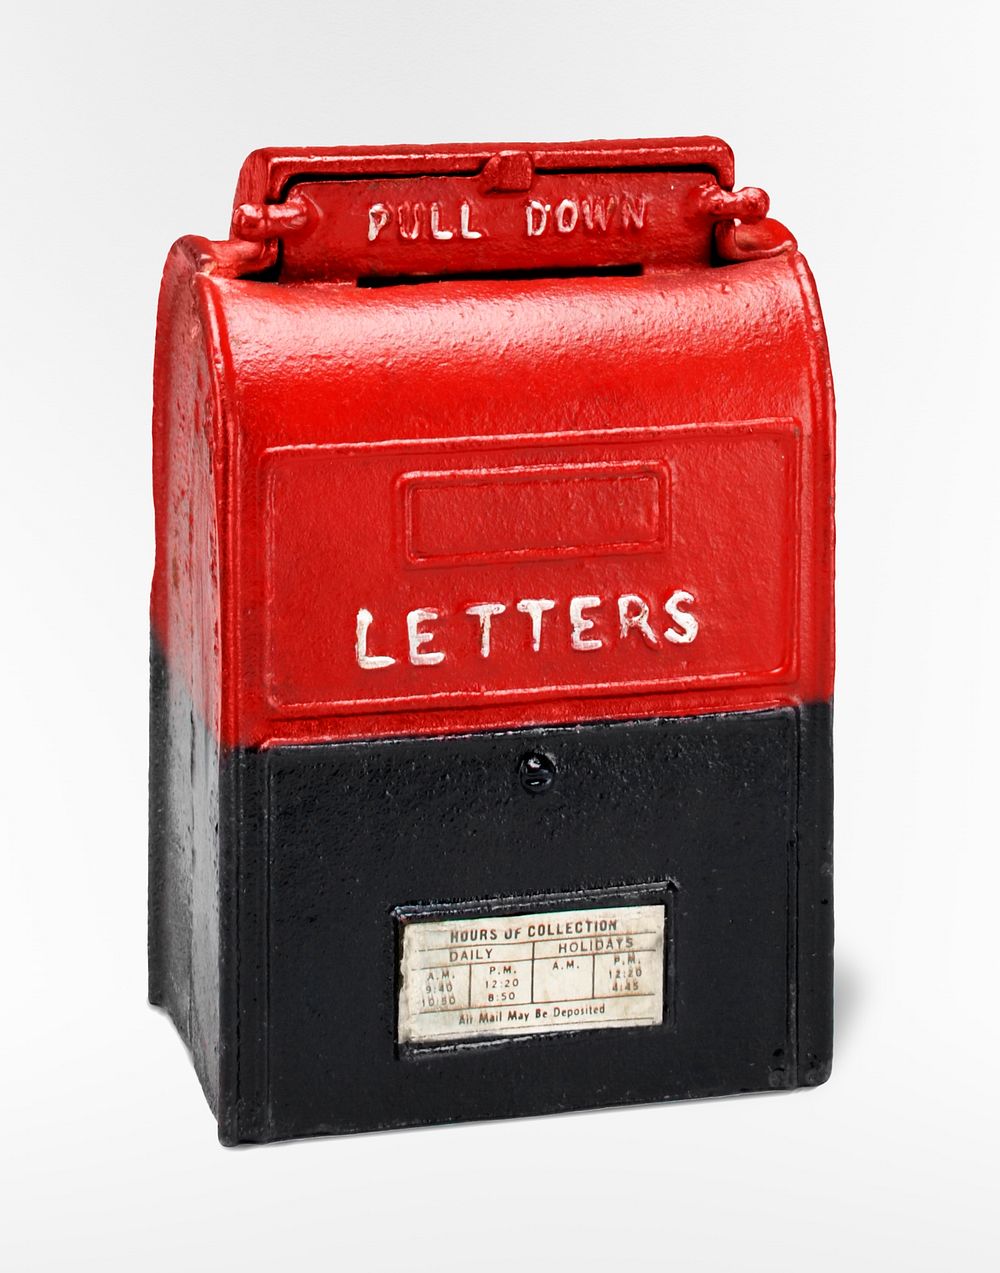 Mail box piggy bank (20th century) object. Original public domain image from The Minneapolis Institute of Art. Digitally…